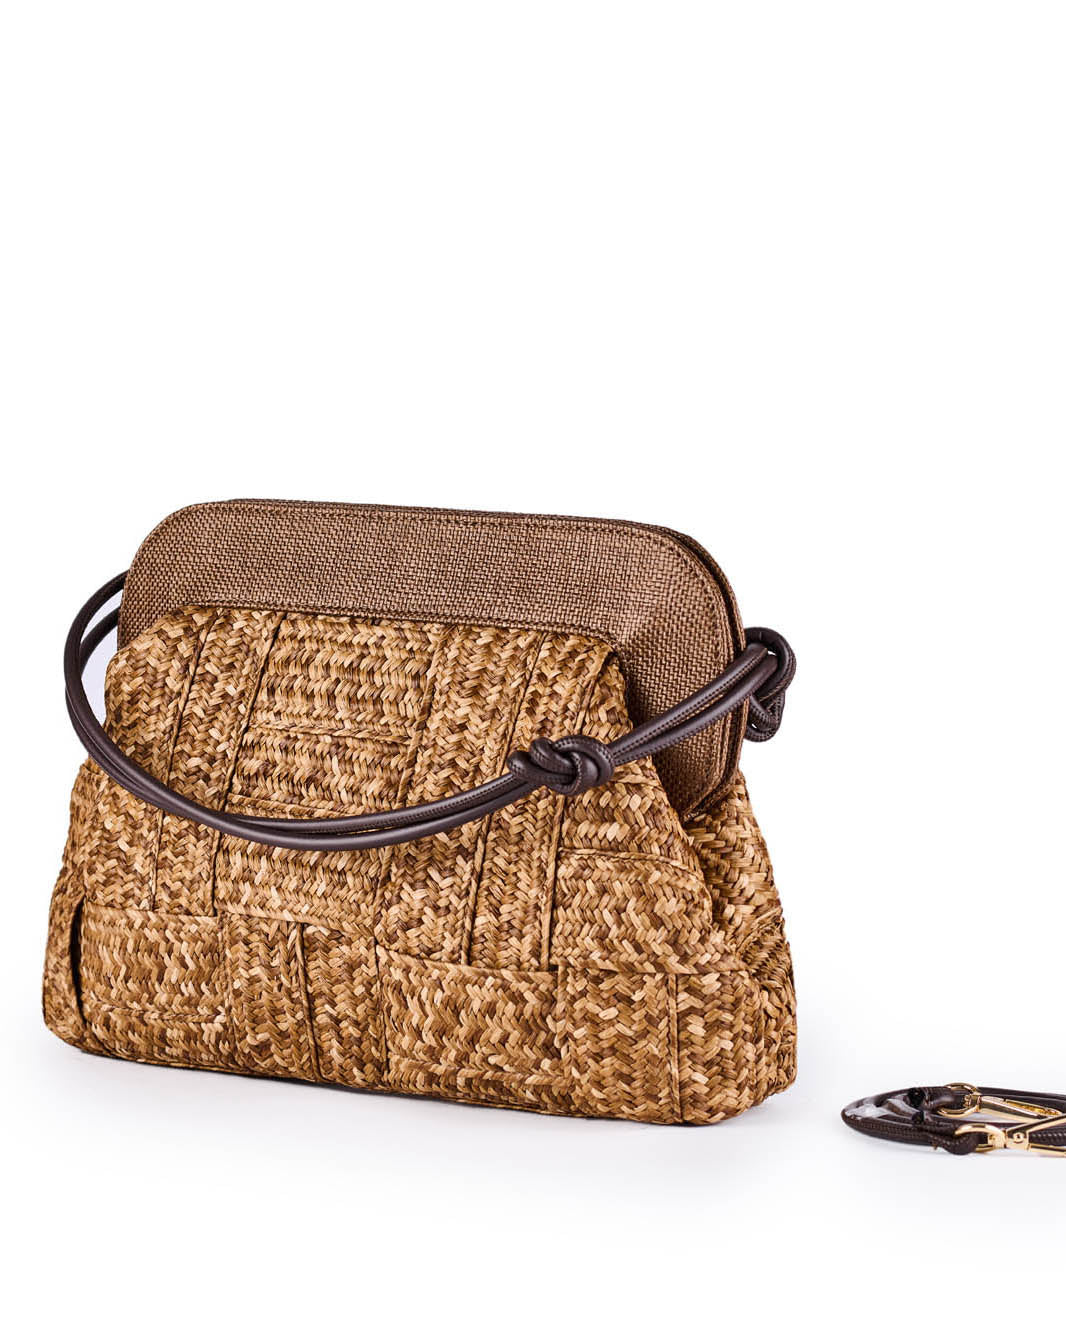 Stylish woven straw handbag with brown strap and clasp against white background